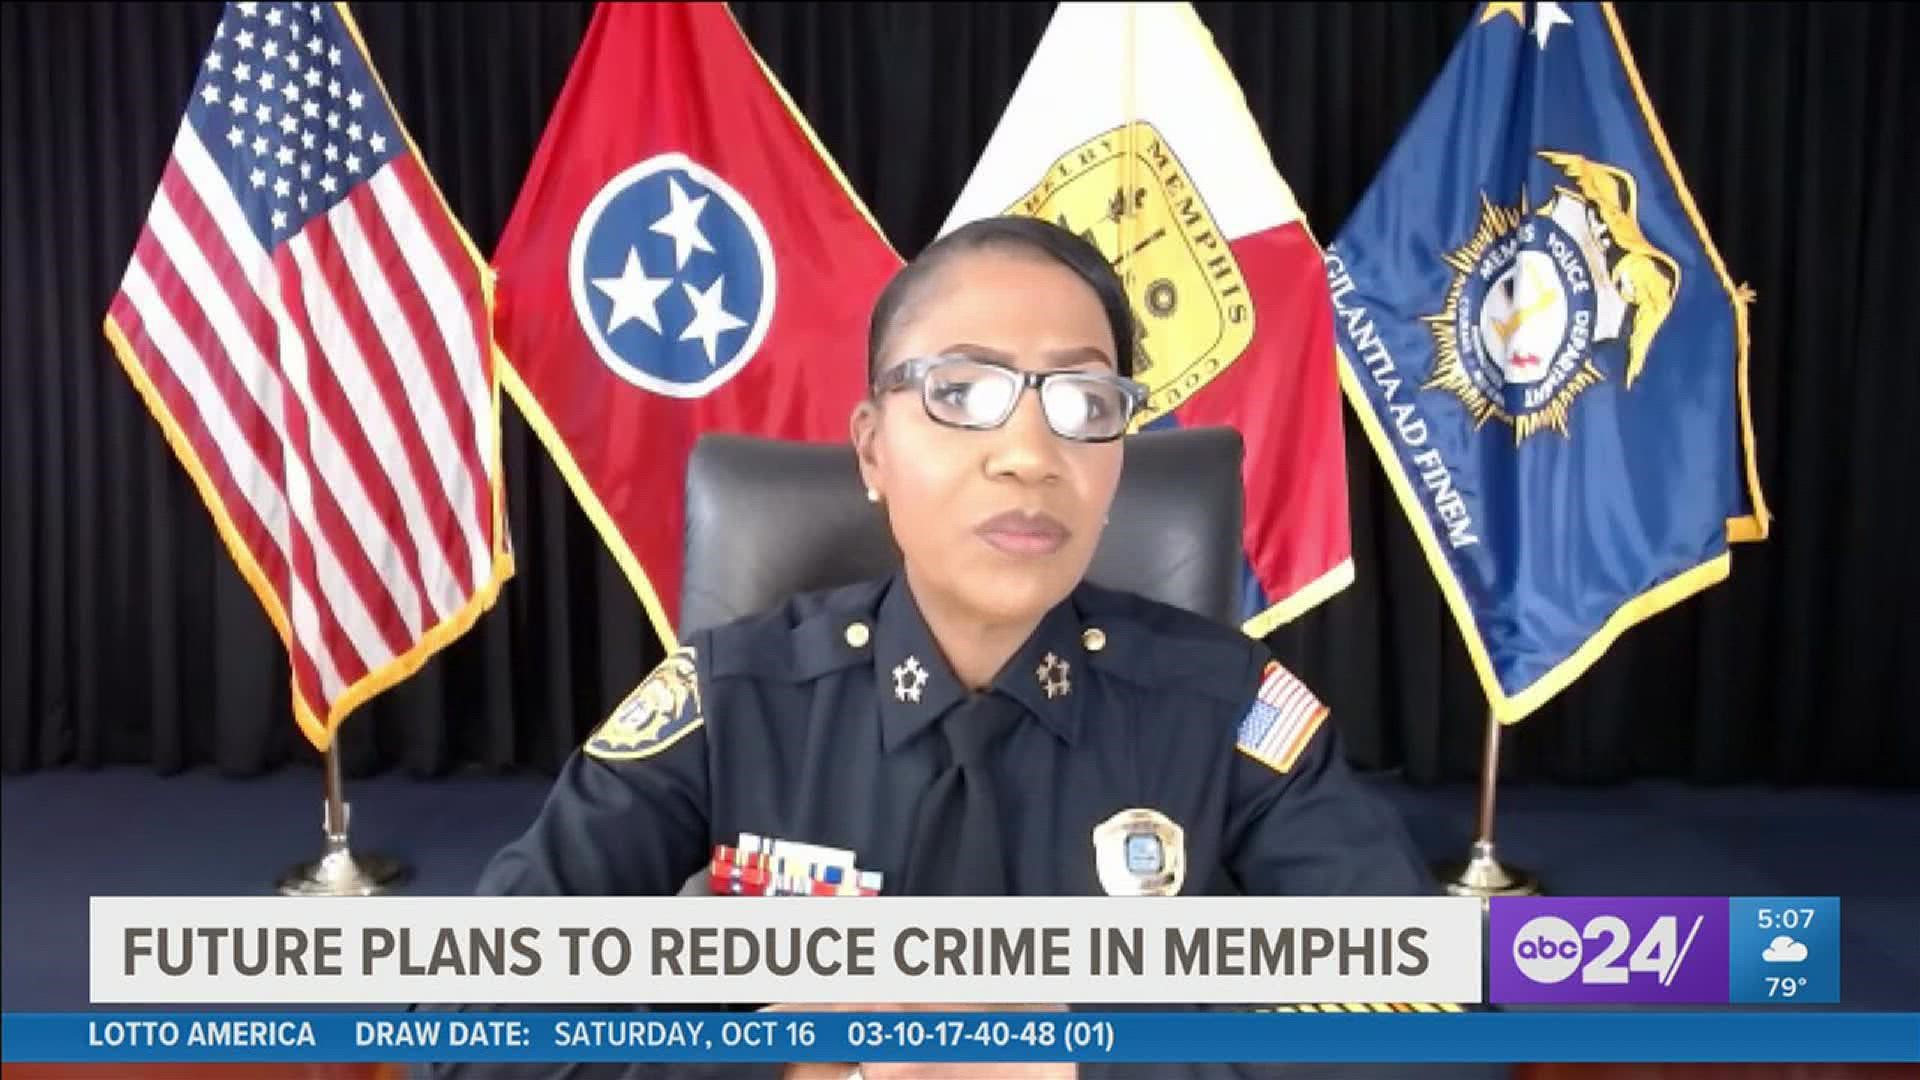 "There will be increased enforcement as it relates to the erratic driving on our city streets, but it won't be targeted towards broken taillights,” said Chief Davis.